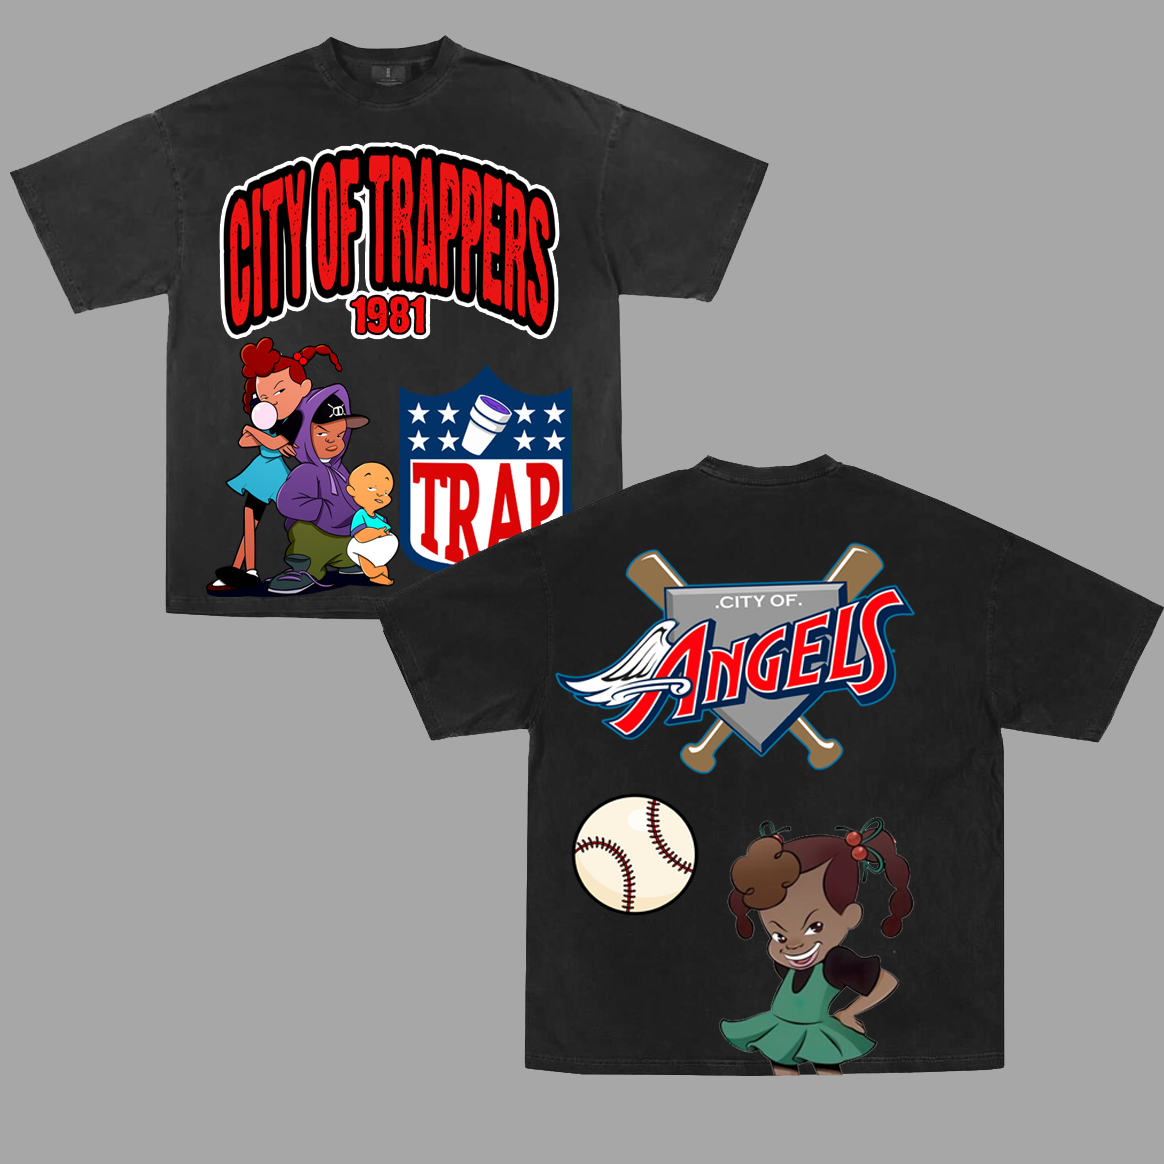 City of Trappers Tees